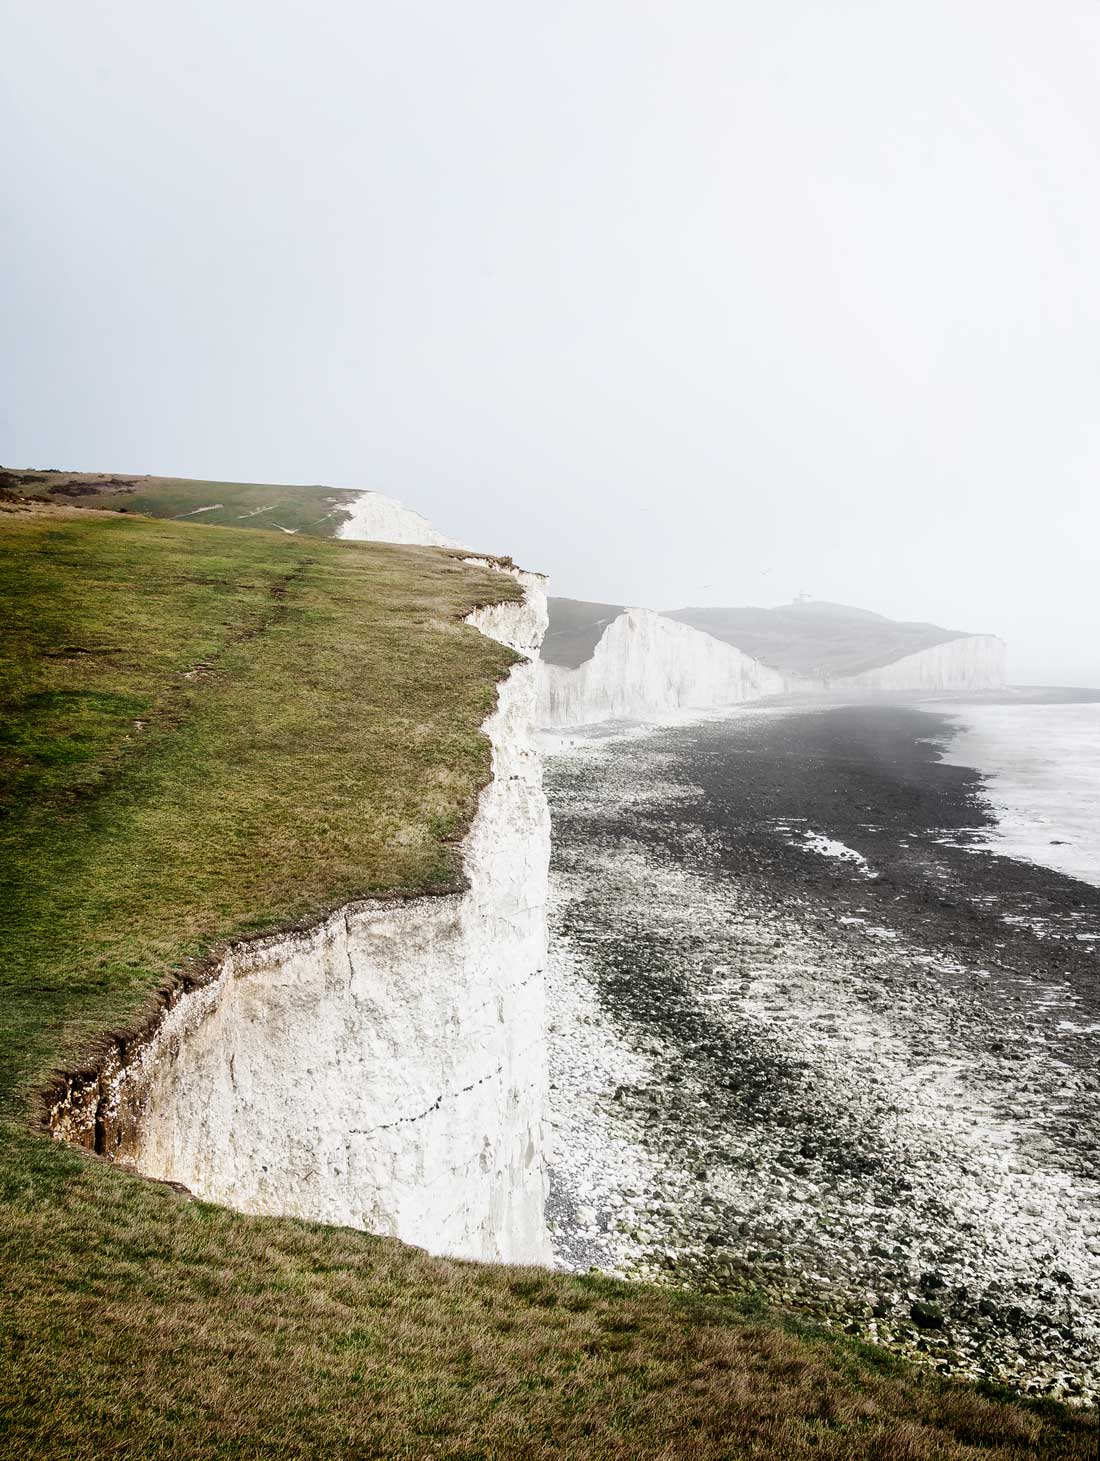 The Seven Sisters cliffs - a guide to the best viewpoints